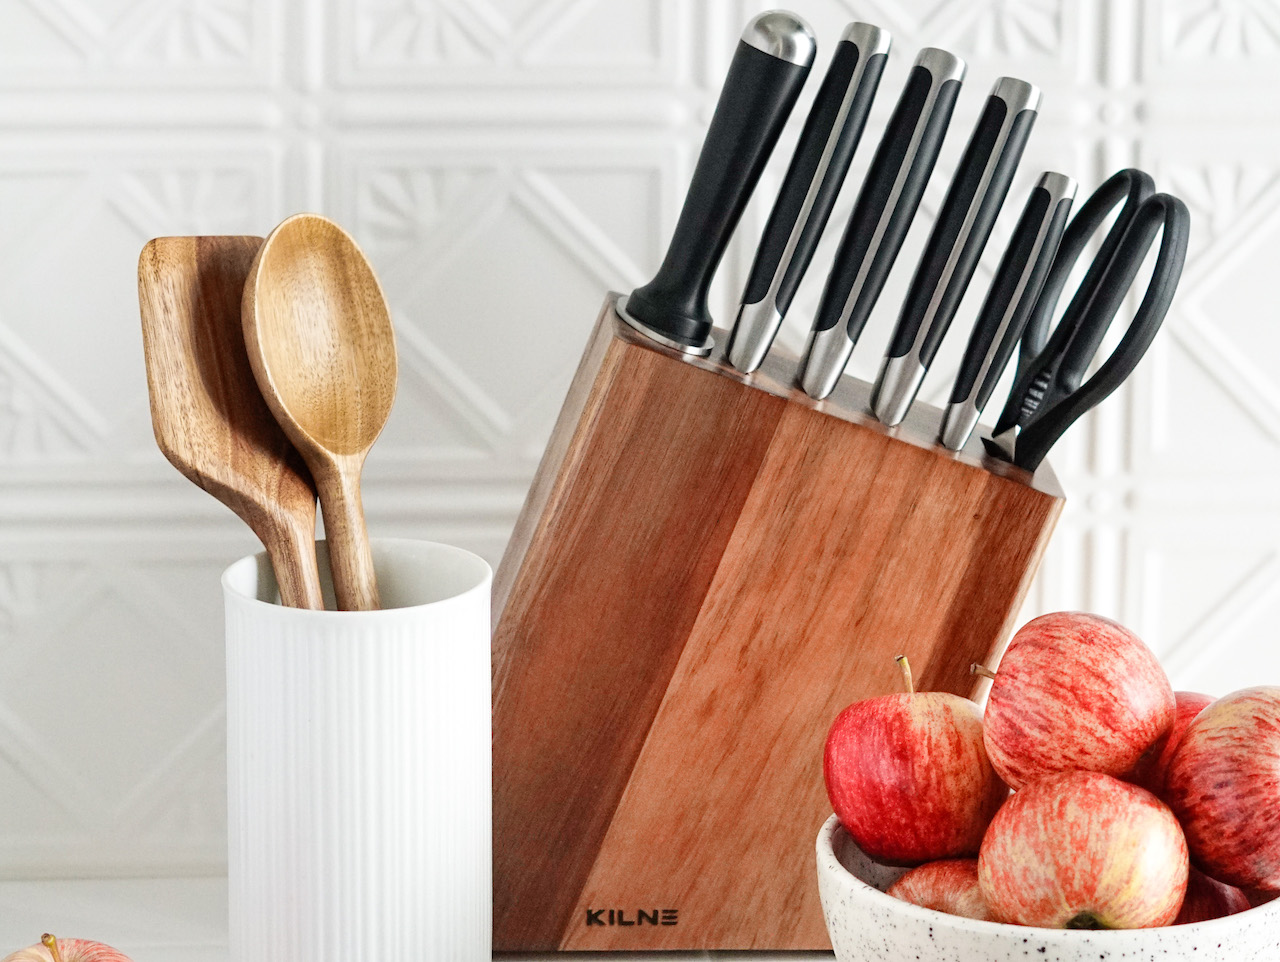  A Kilne knife block, utensils and utensil jar on sale as part of the Best Black Friday Deals,